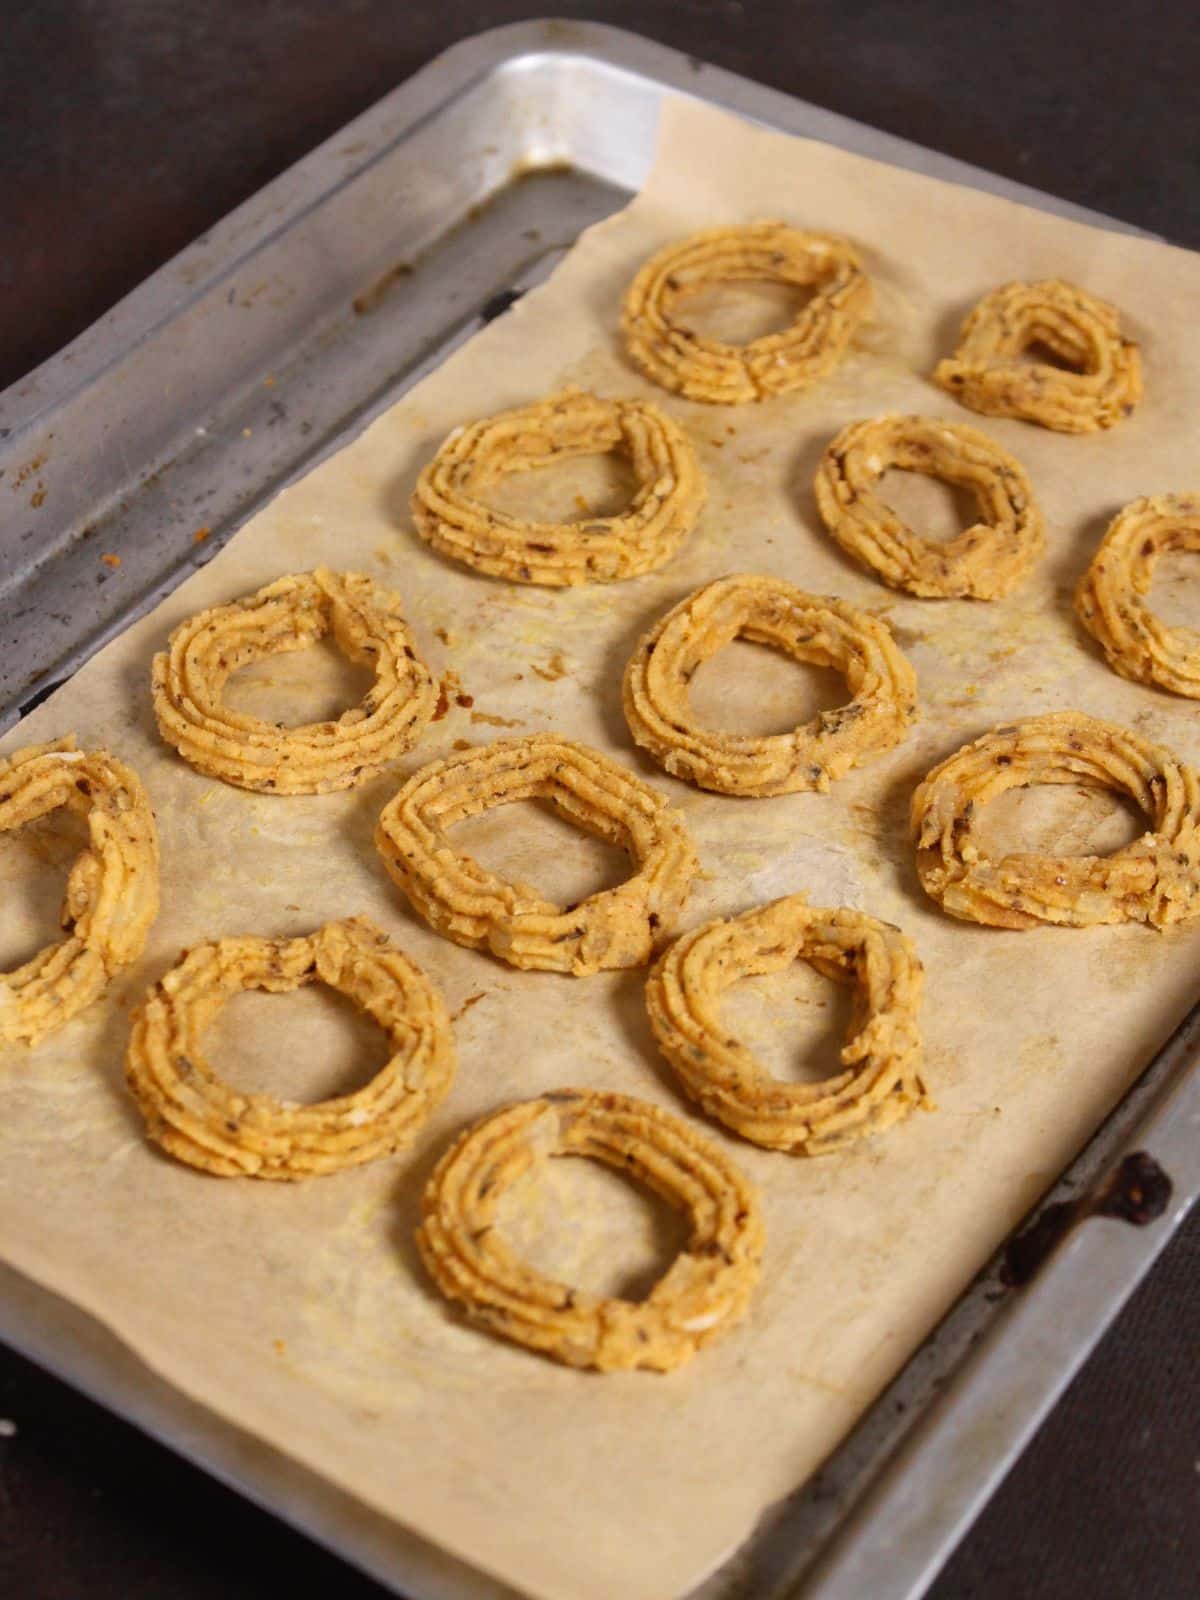 make small small rings out of the mixture on a baking paper and bake for 45 mins 